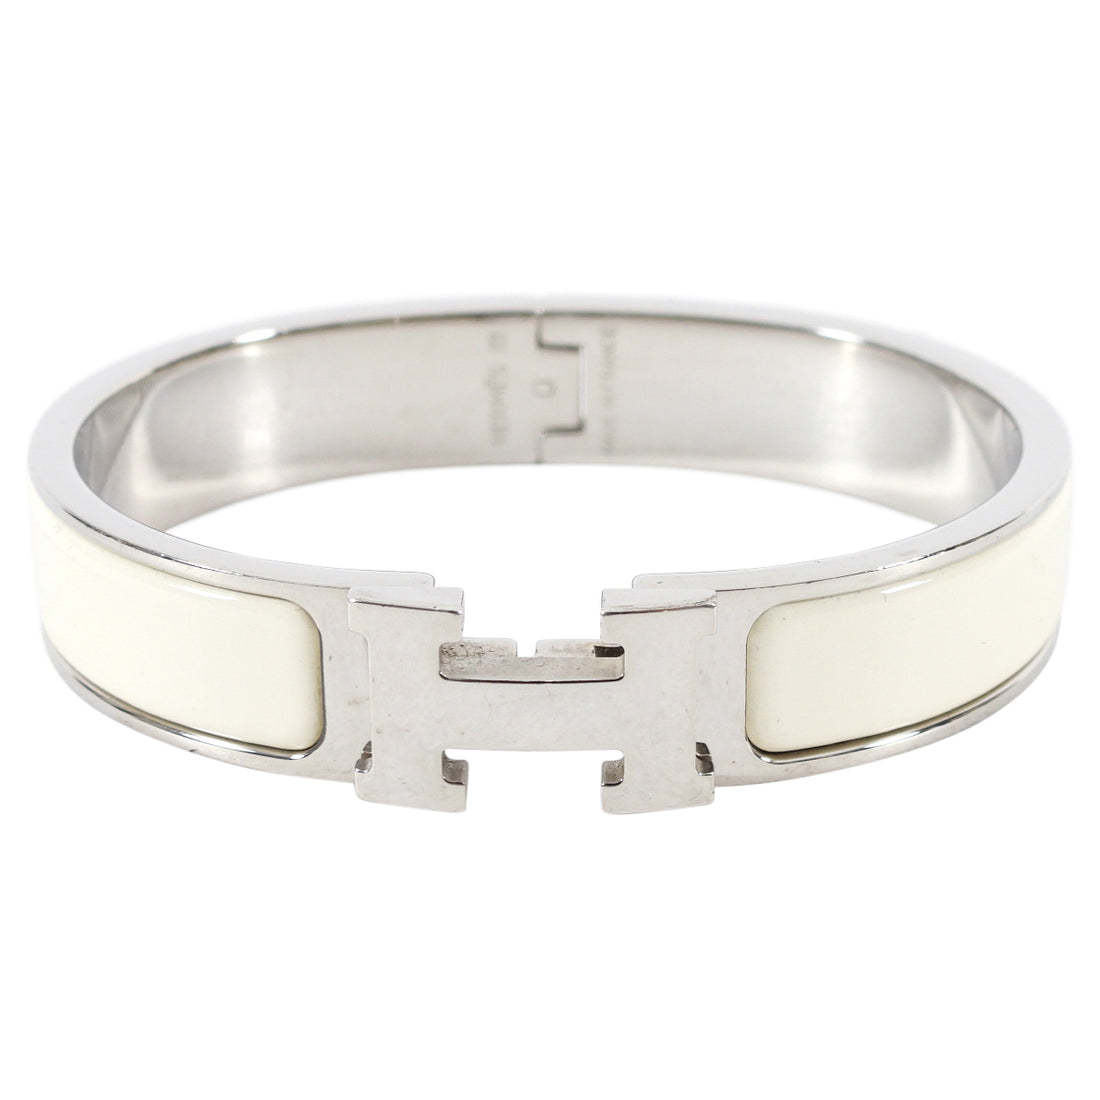 Hermes Narrow Clic H Bracelet in Craie and Silver